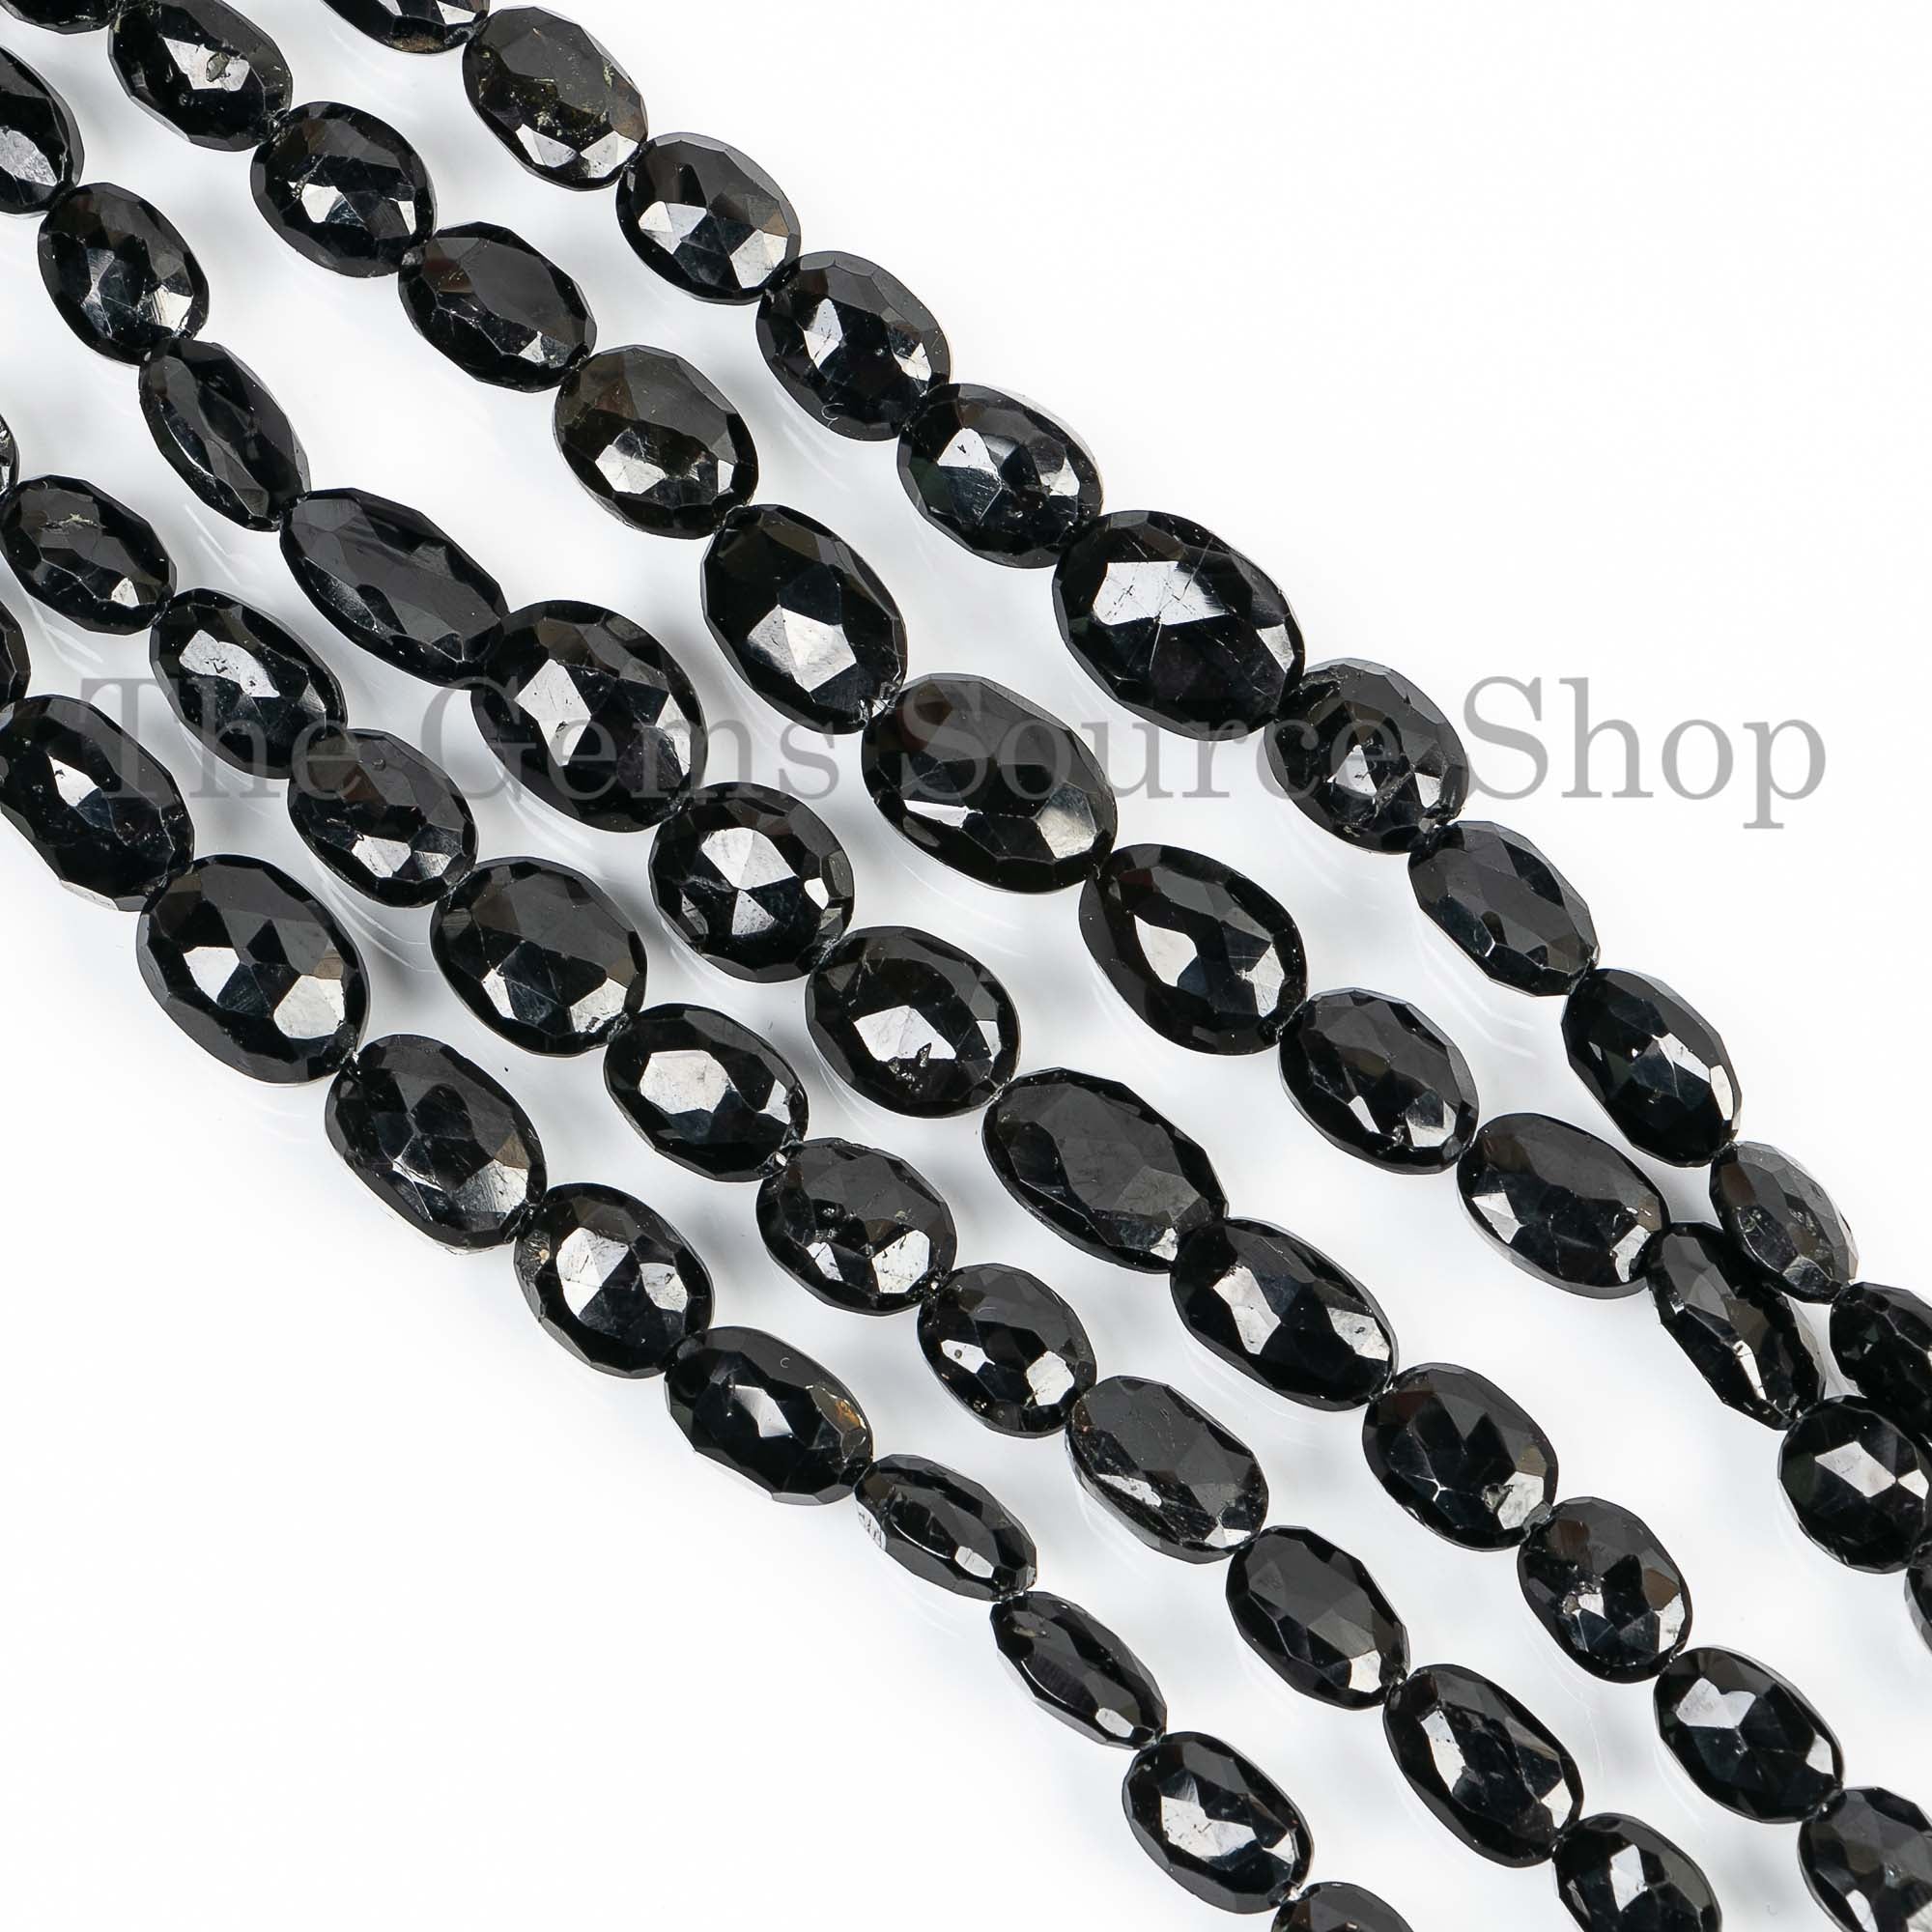 Black Tourmaline Oval Beads, Tourmaline Faceted Oval Beads, Tourmaline Briolette Beads, Straight Drill Oval Beads, Faceted Oval Beads